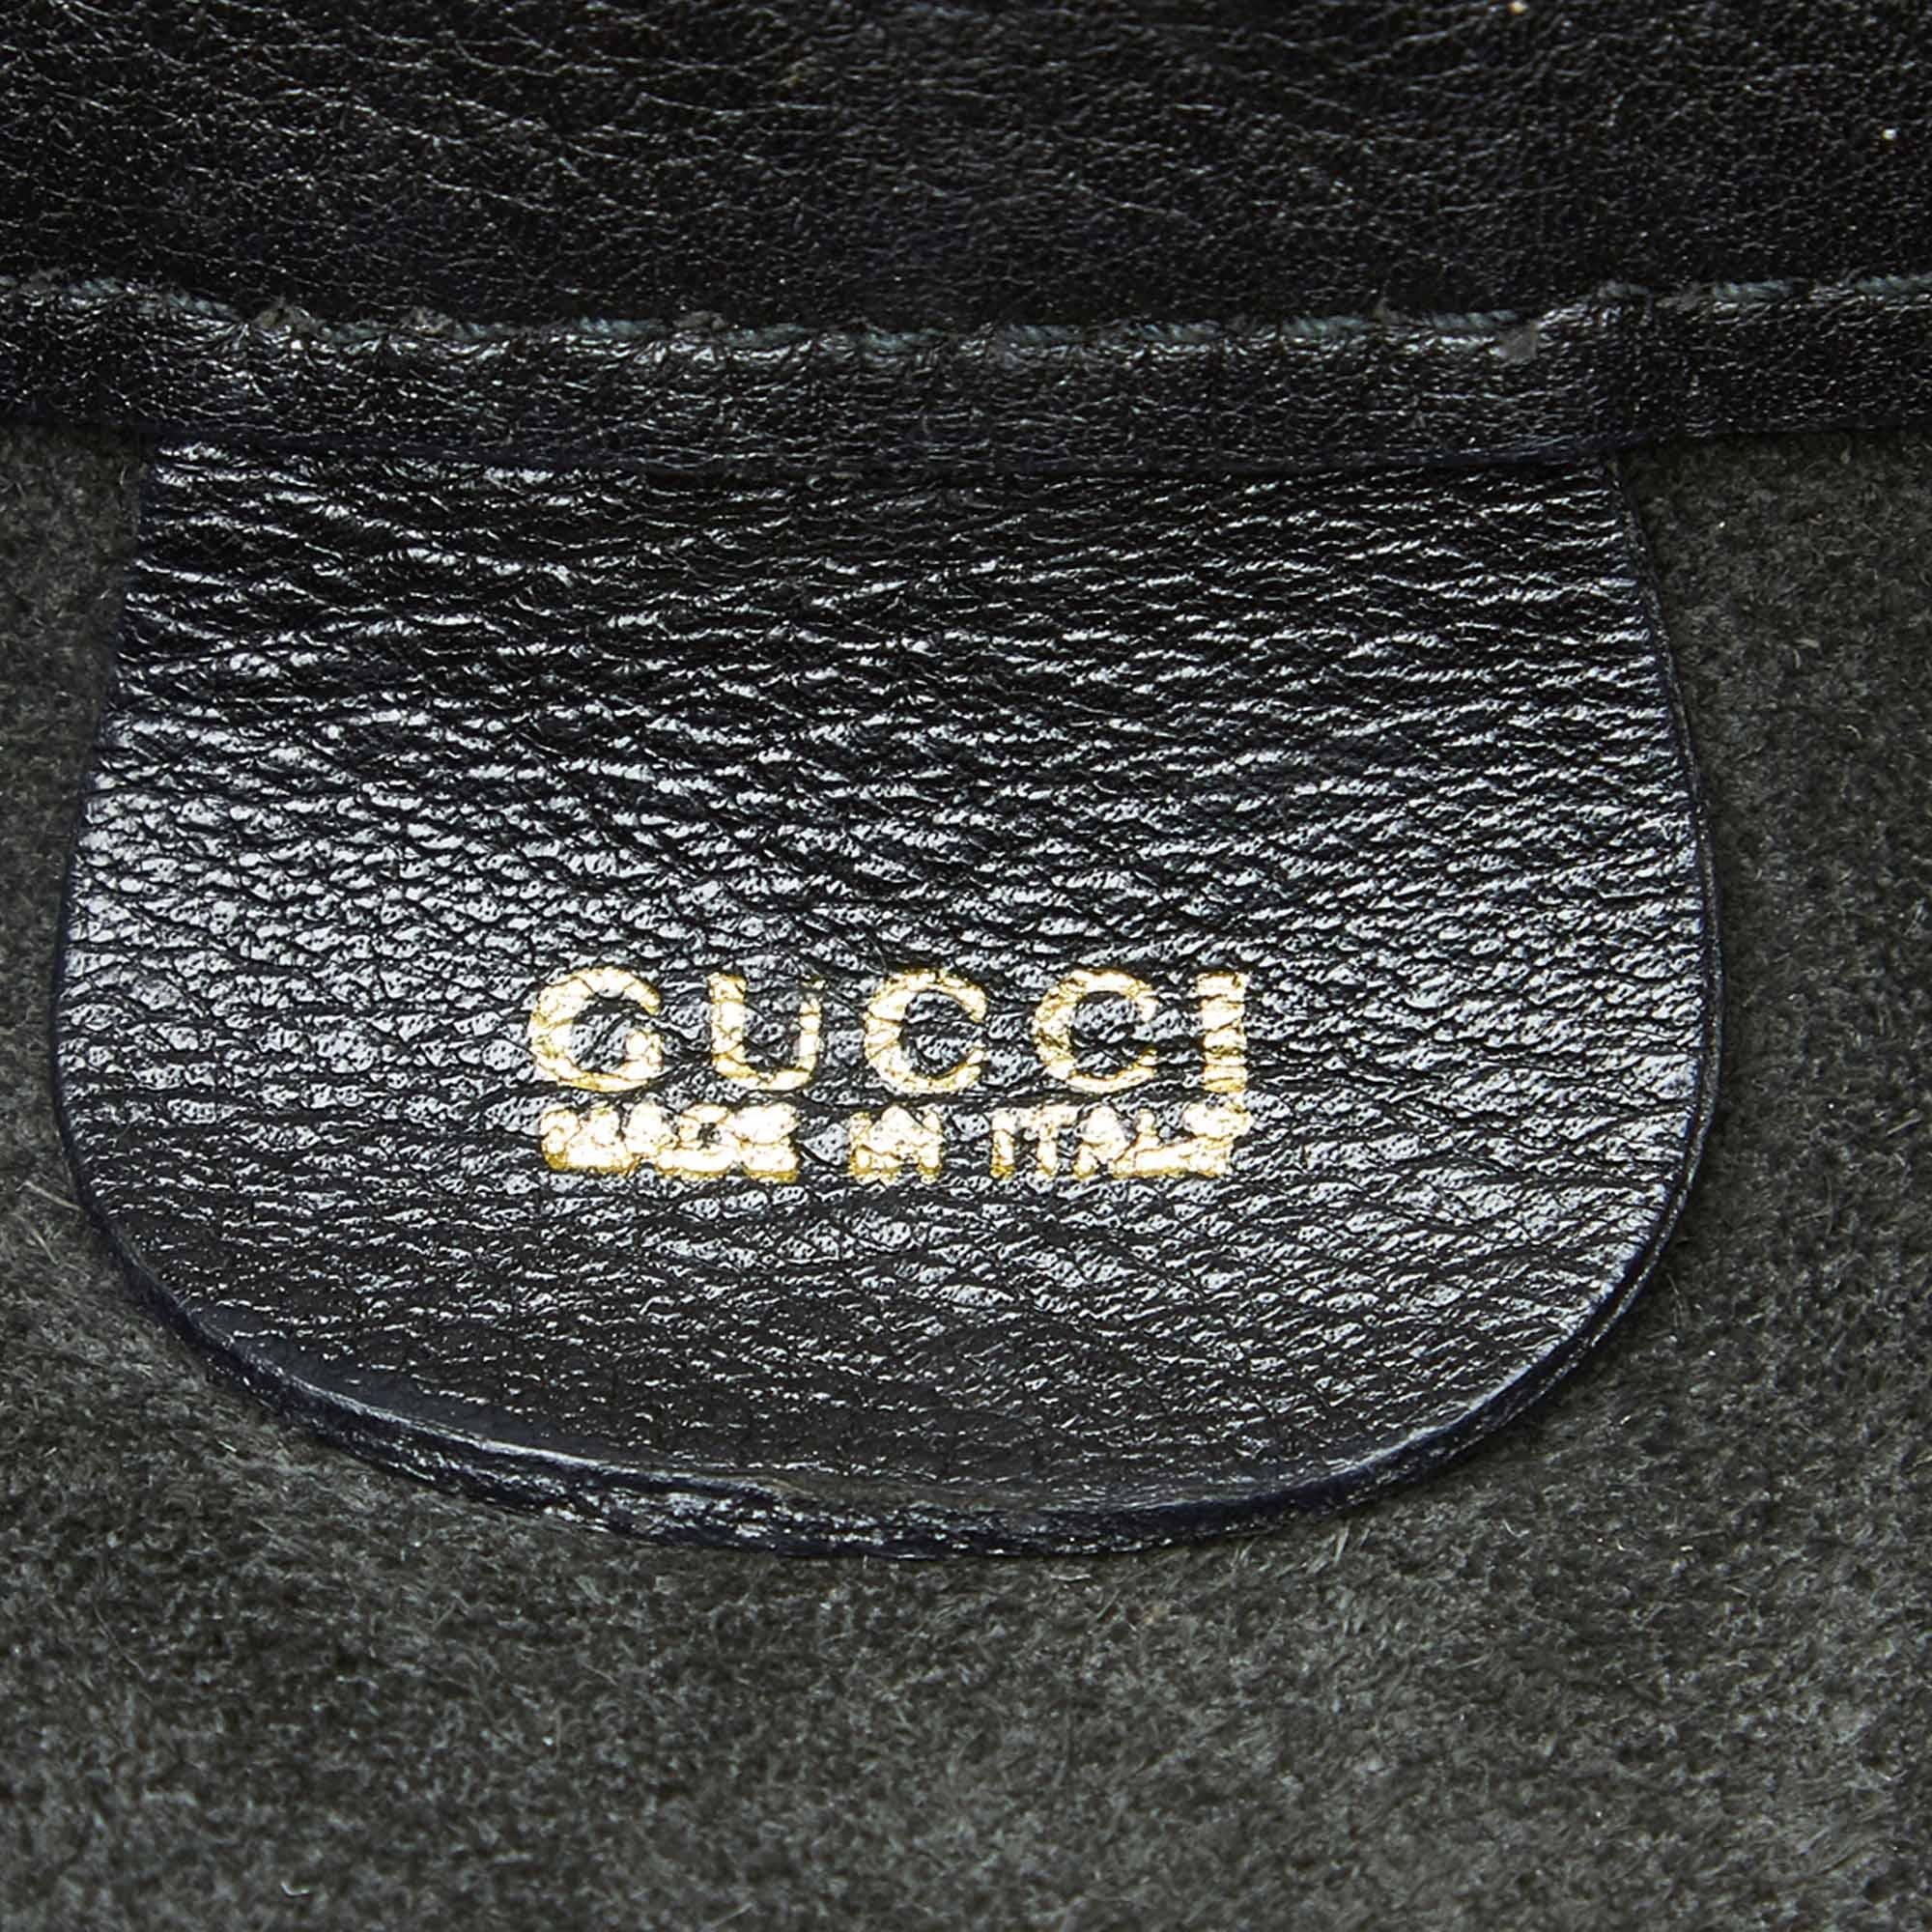 Vintage Authentic Gucci Black Leather Bamboo Drawstring Backpack Italy LARGE  2